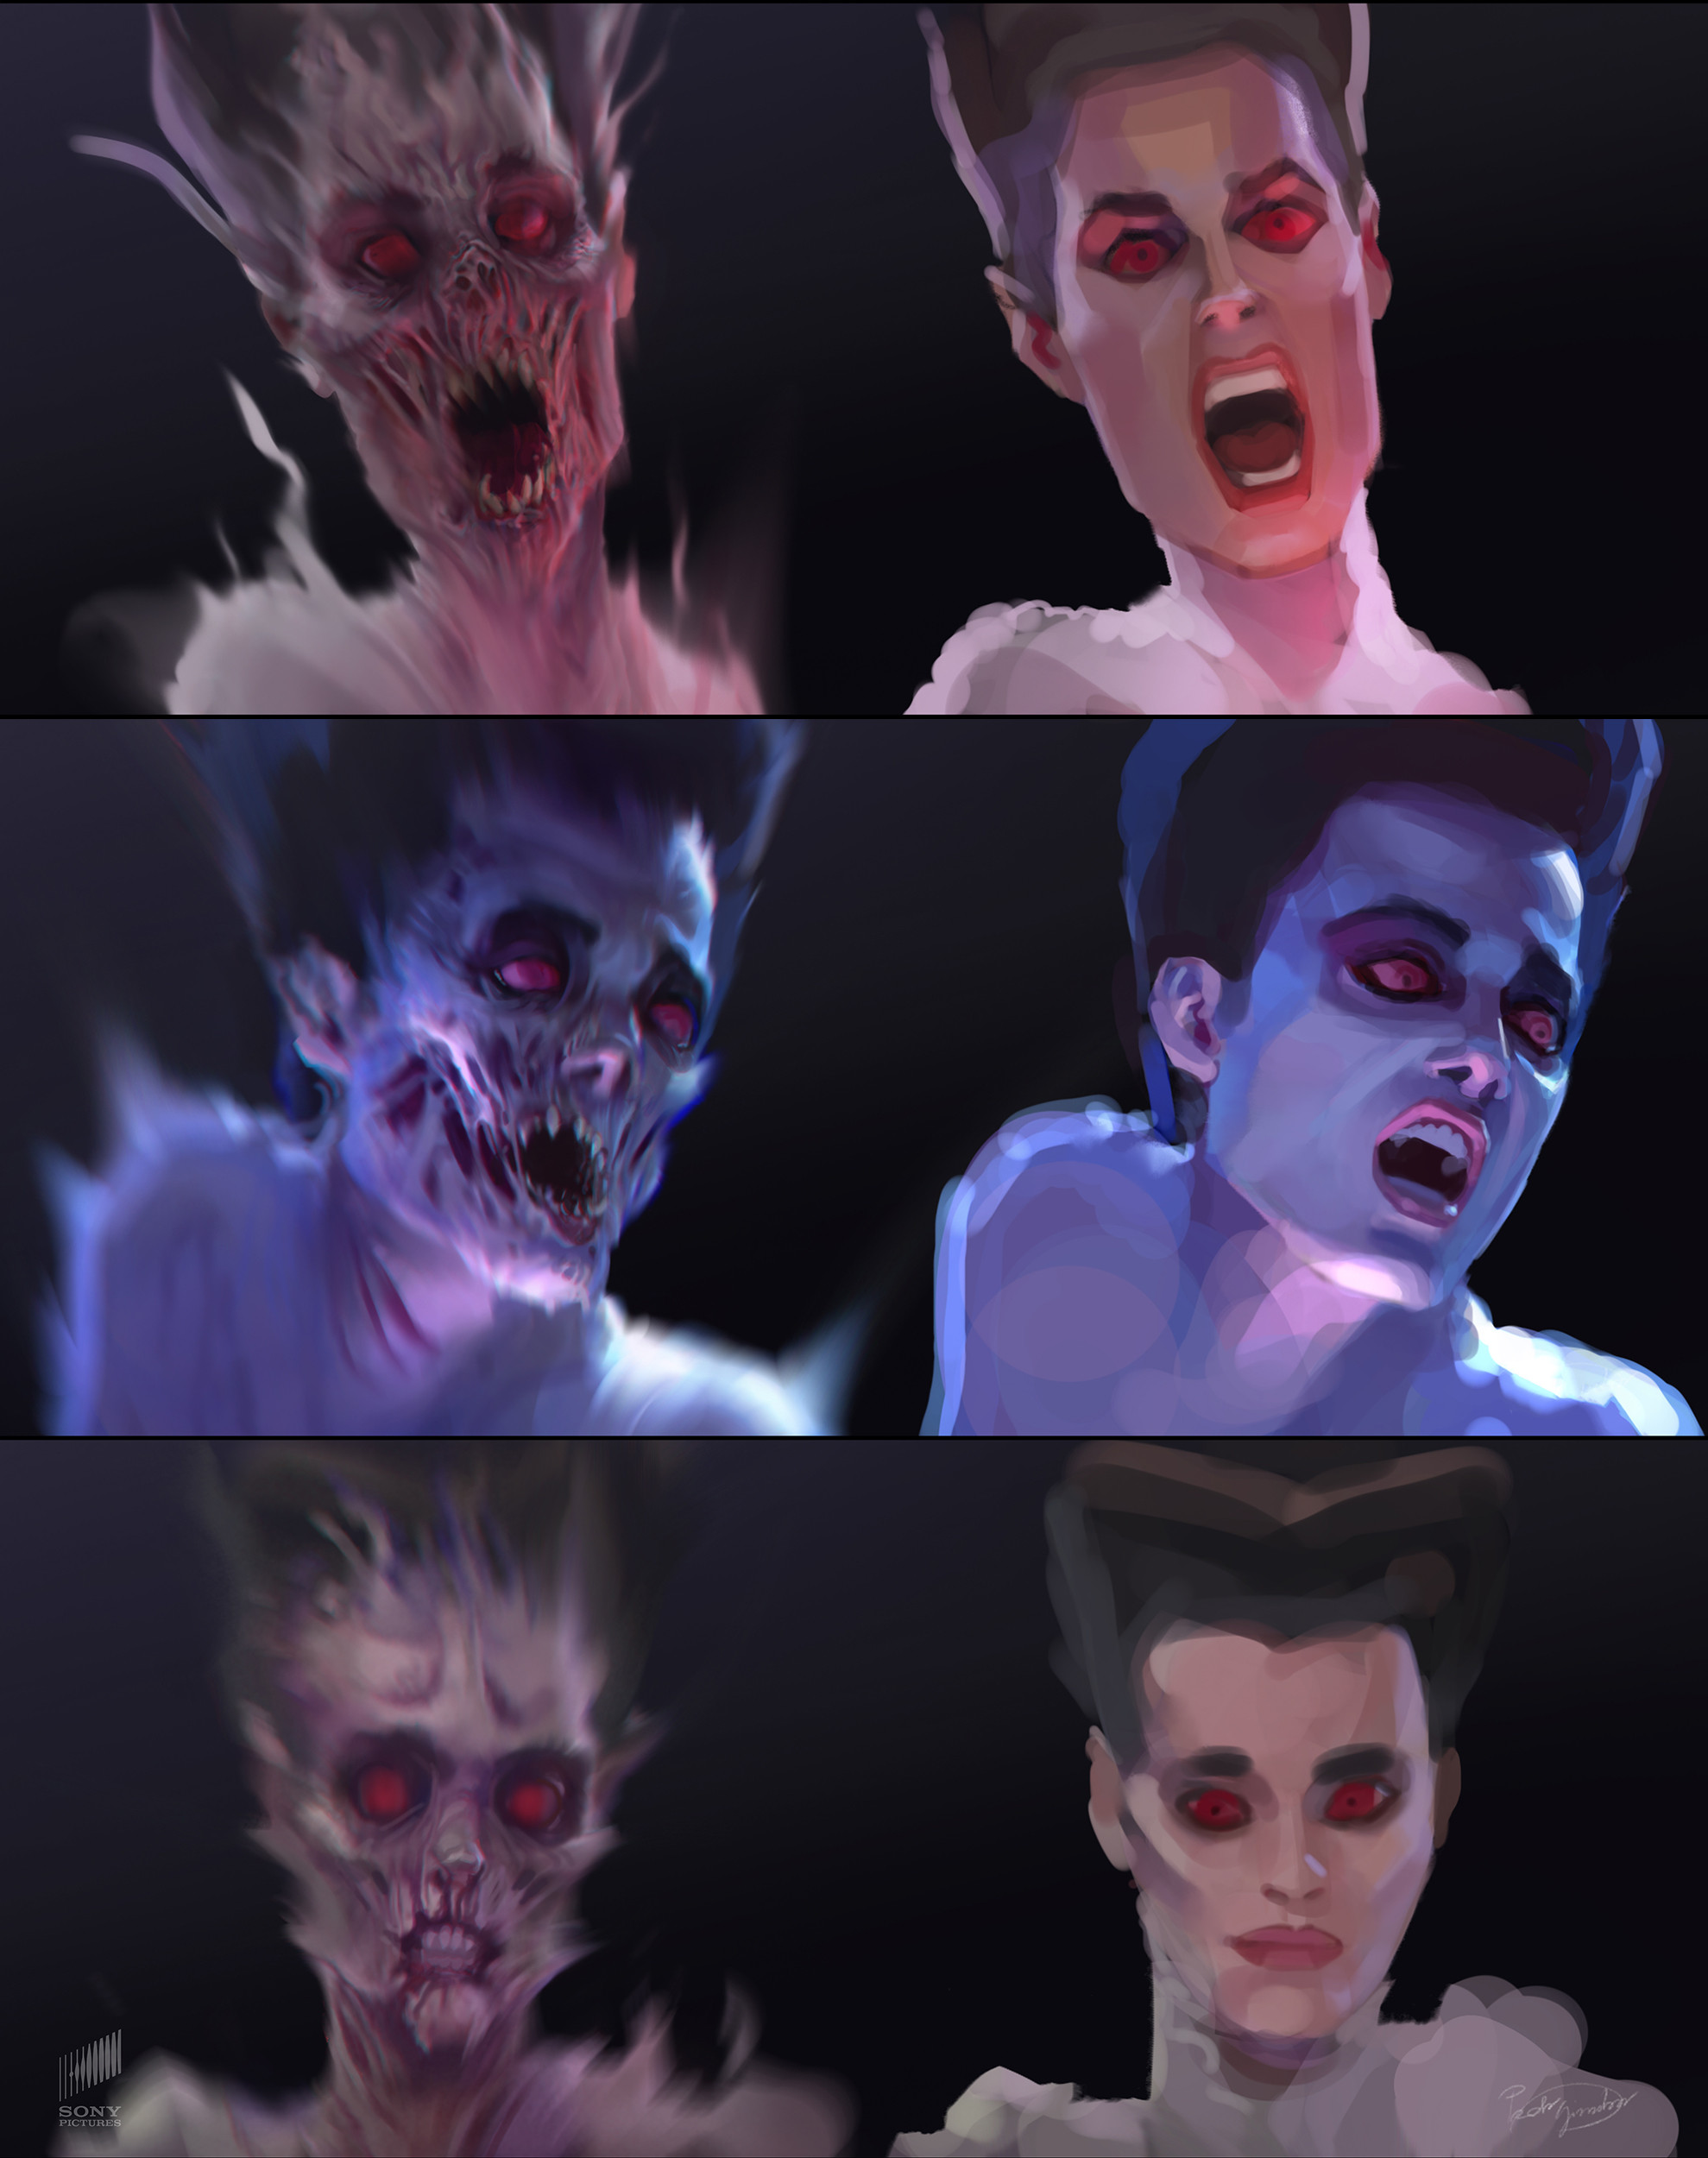 At a certain point in the movie, a portion of Gozer power is removed from it, so its forms withers into a desiccated husk.
I was tasked with visualizing how this might look. 
These are some quick sketches for the withering. 